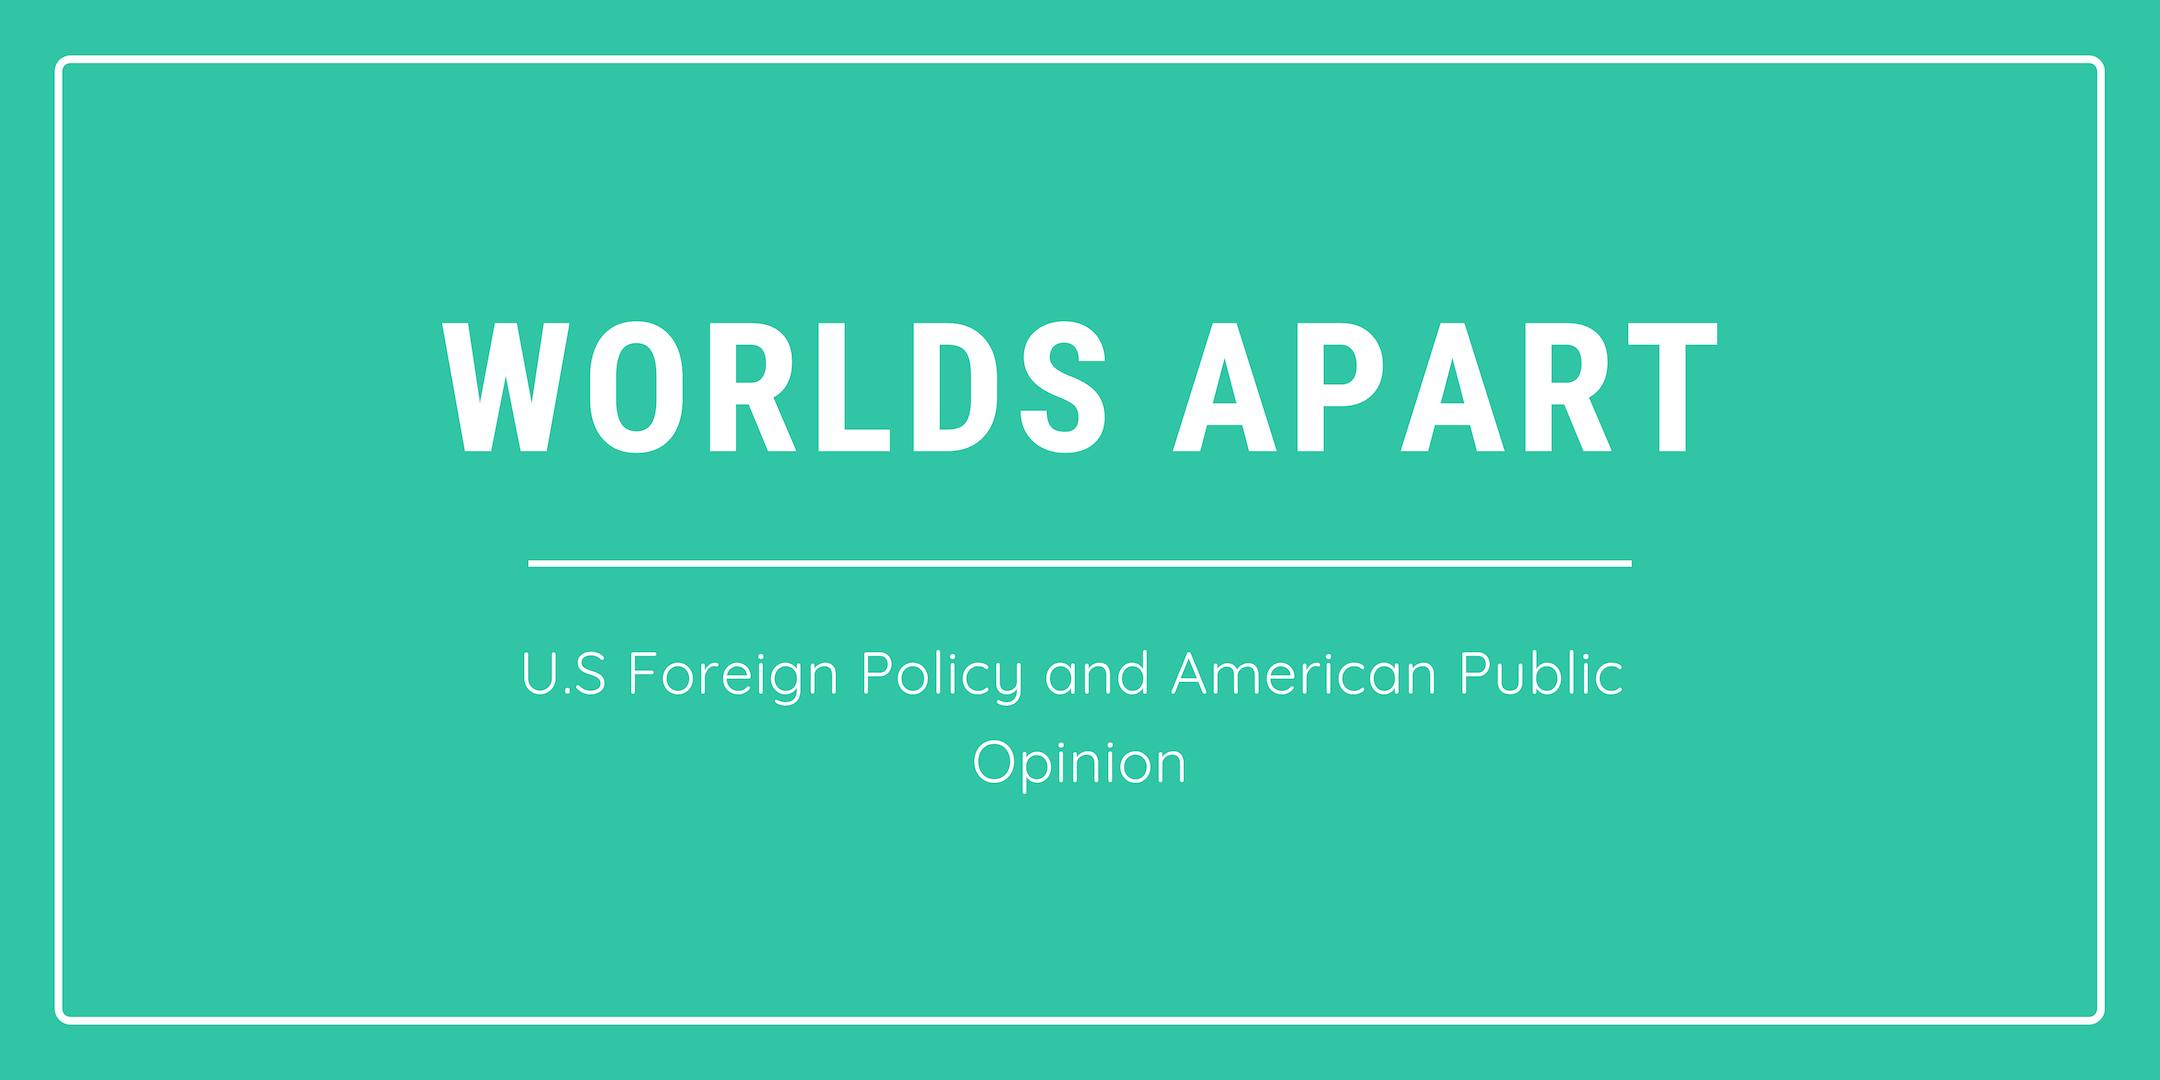 Worlds Apart: U.S. Foreign Policy and American Public Opinion